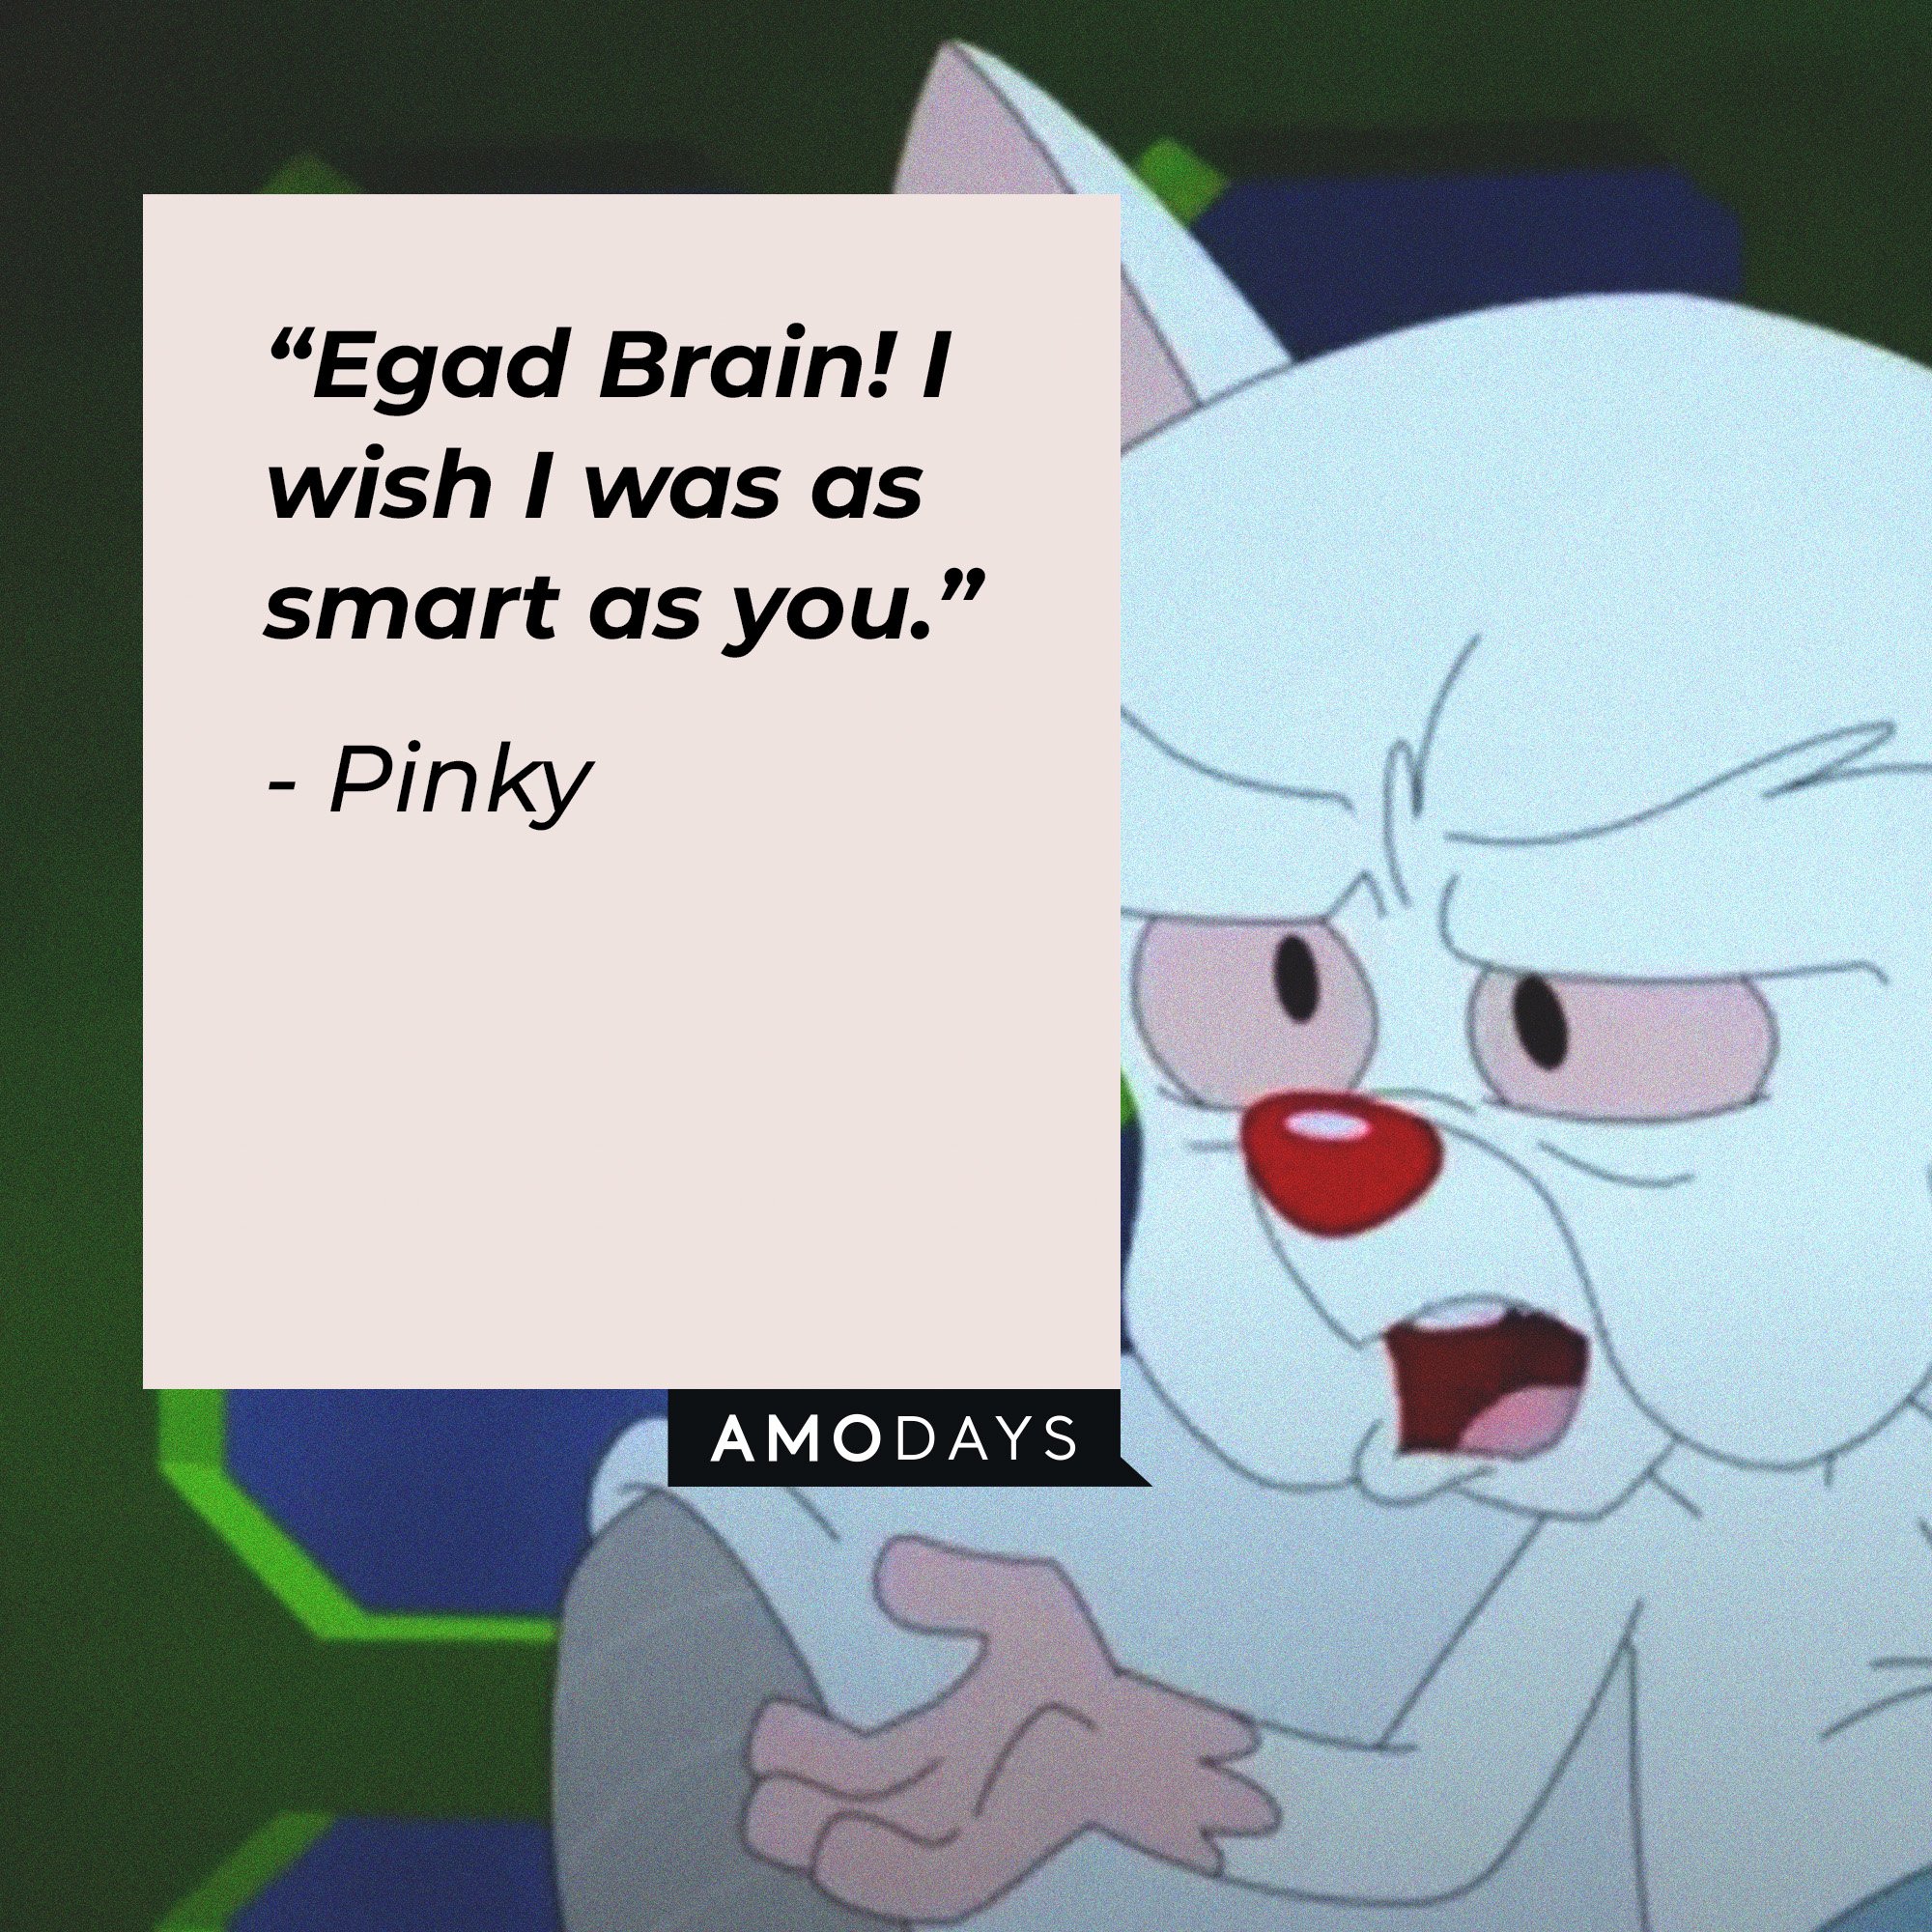  Pinky's quote: “Egad Brain! I wish I was as smart as you.” | Image: AmoDays